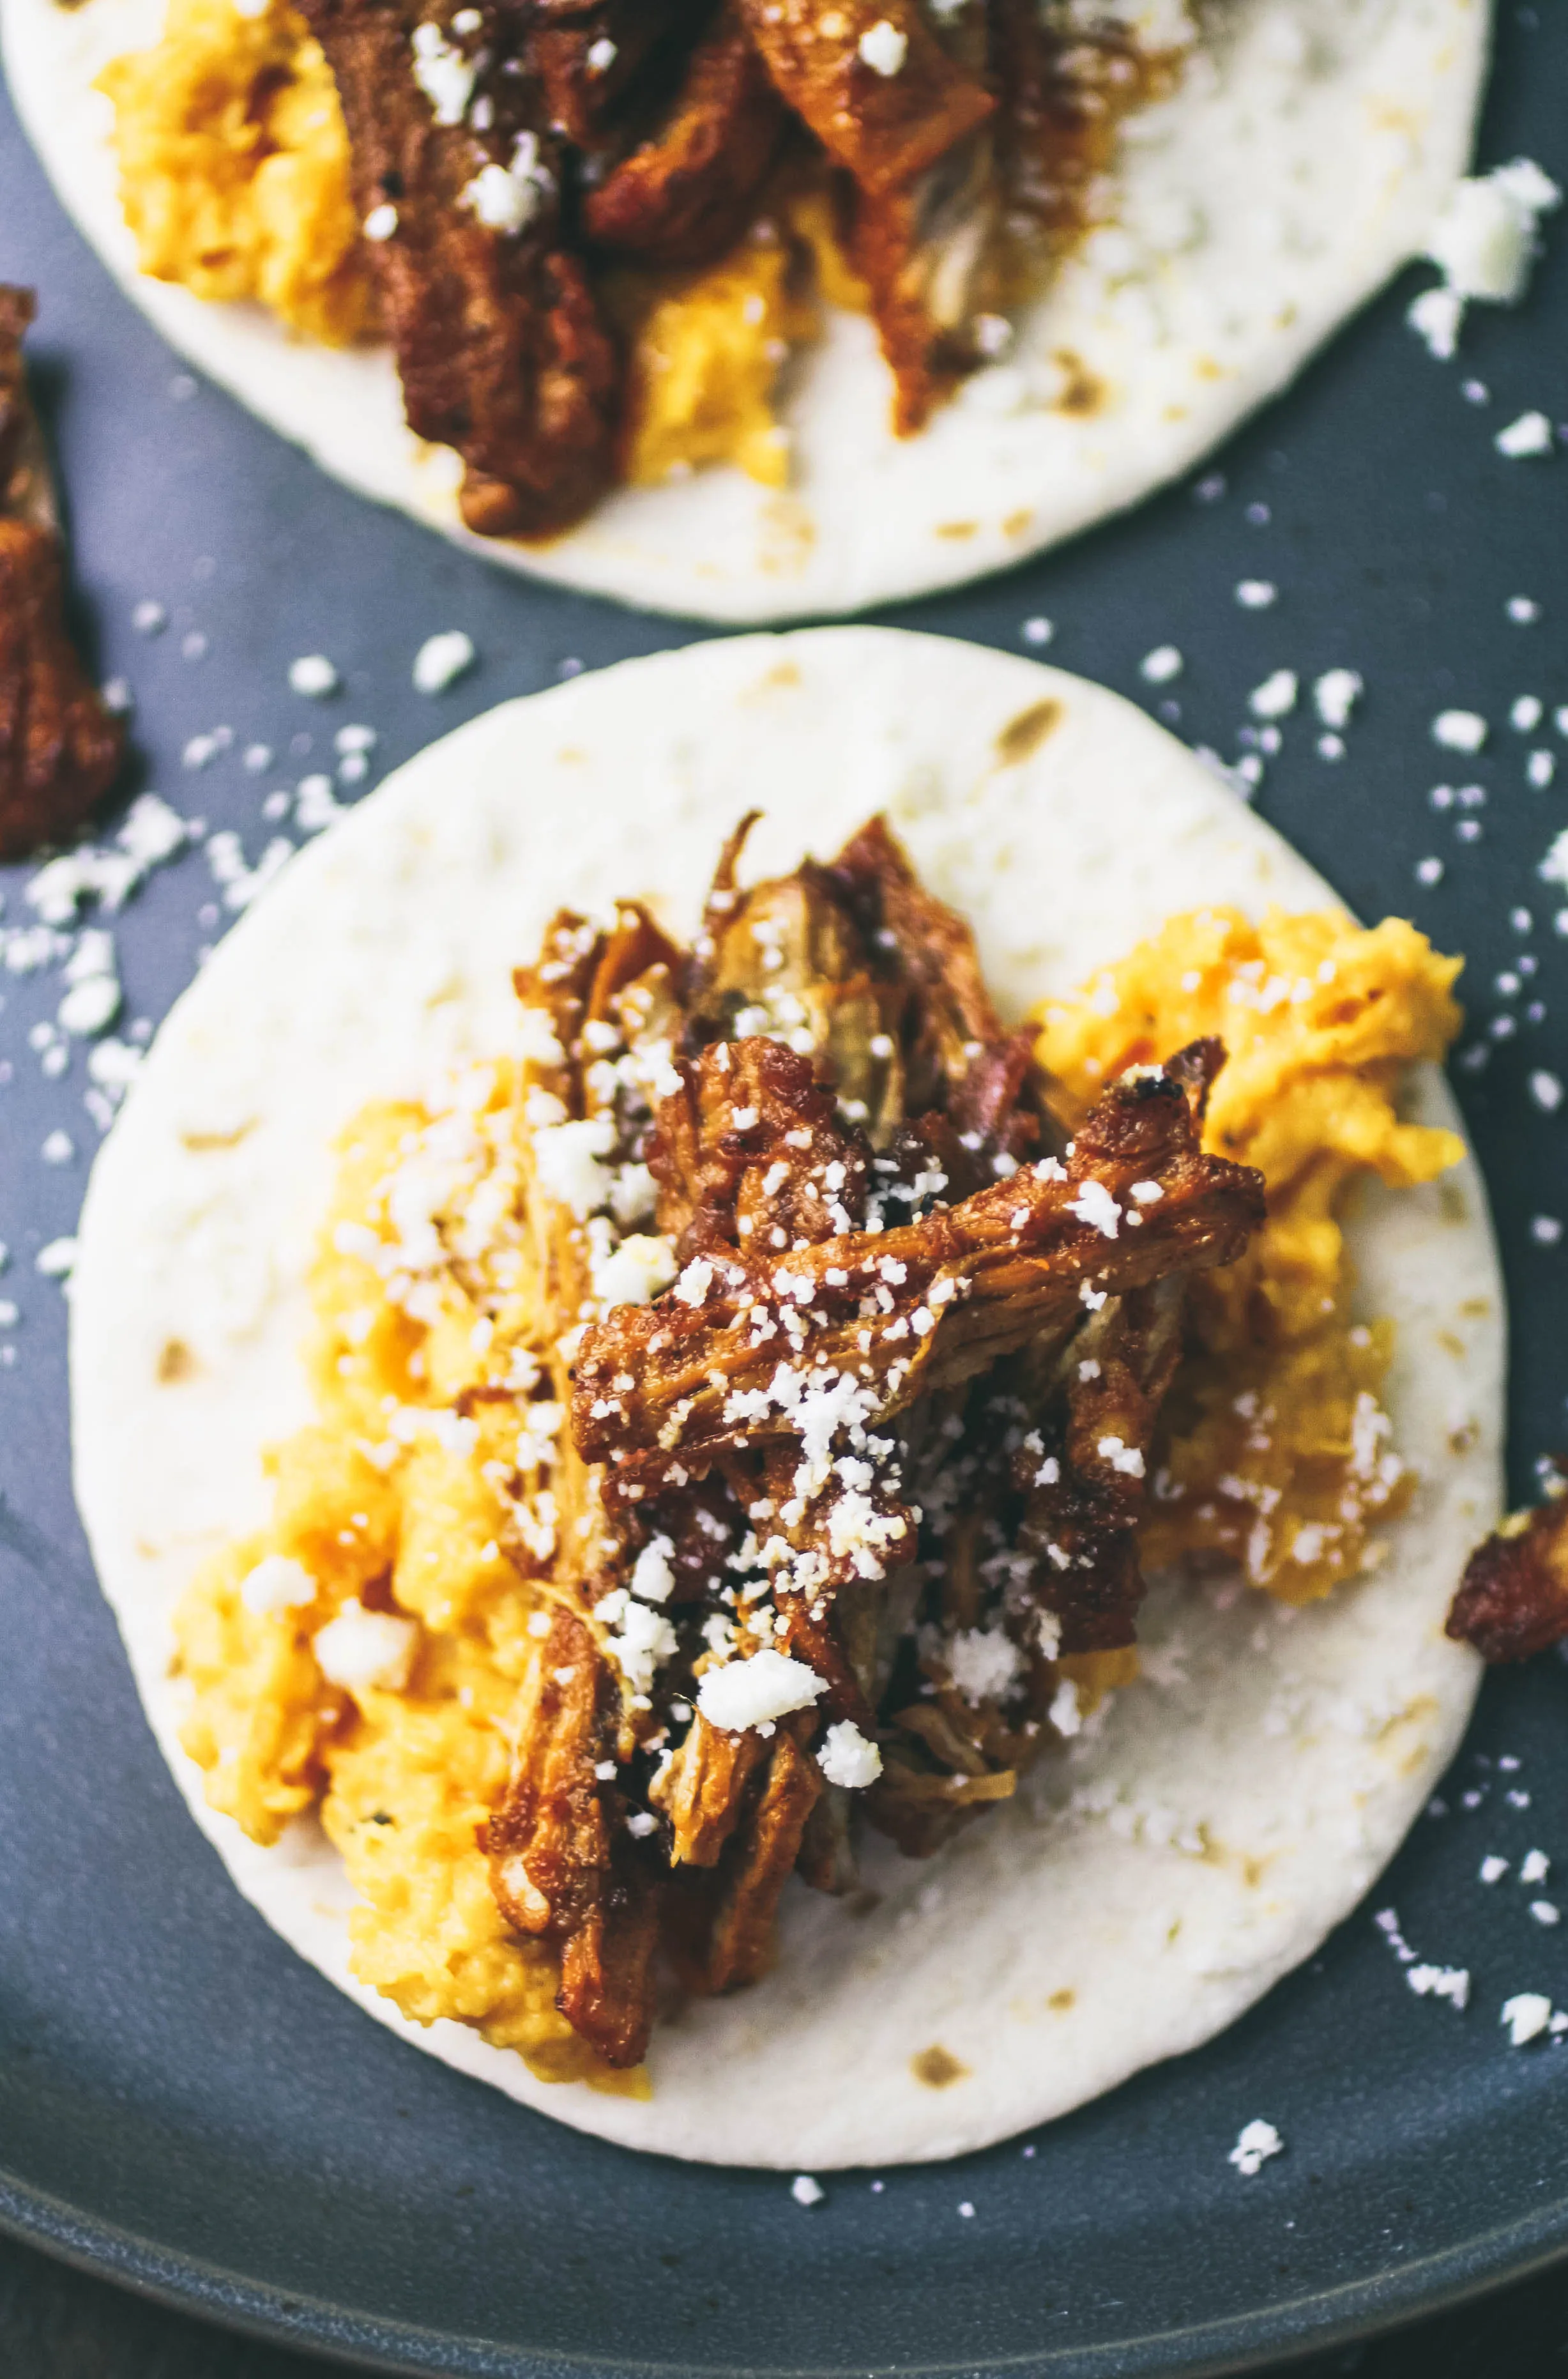 Pork Carnitas Tacos with Butternut Squash Puree are fabulous any night of the week for dinner. Make these Pork Carnitas Tacos with Butternut Squash Puree soon!